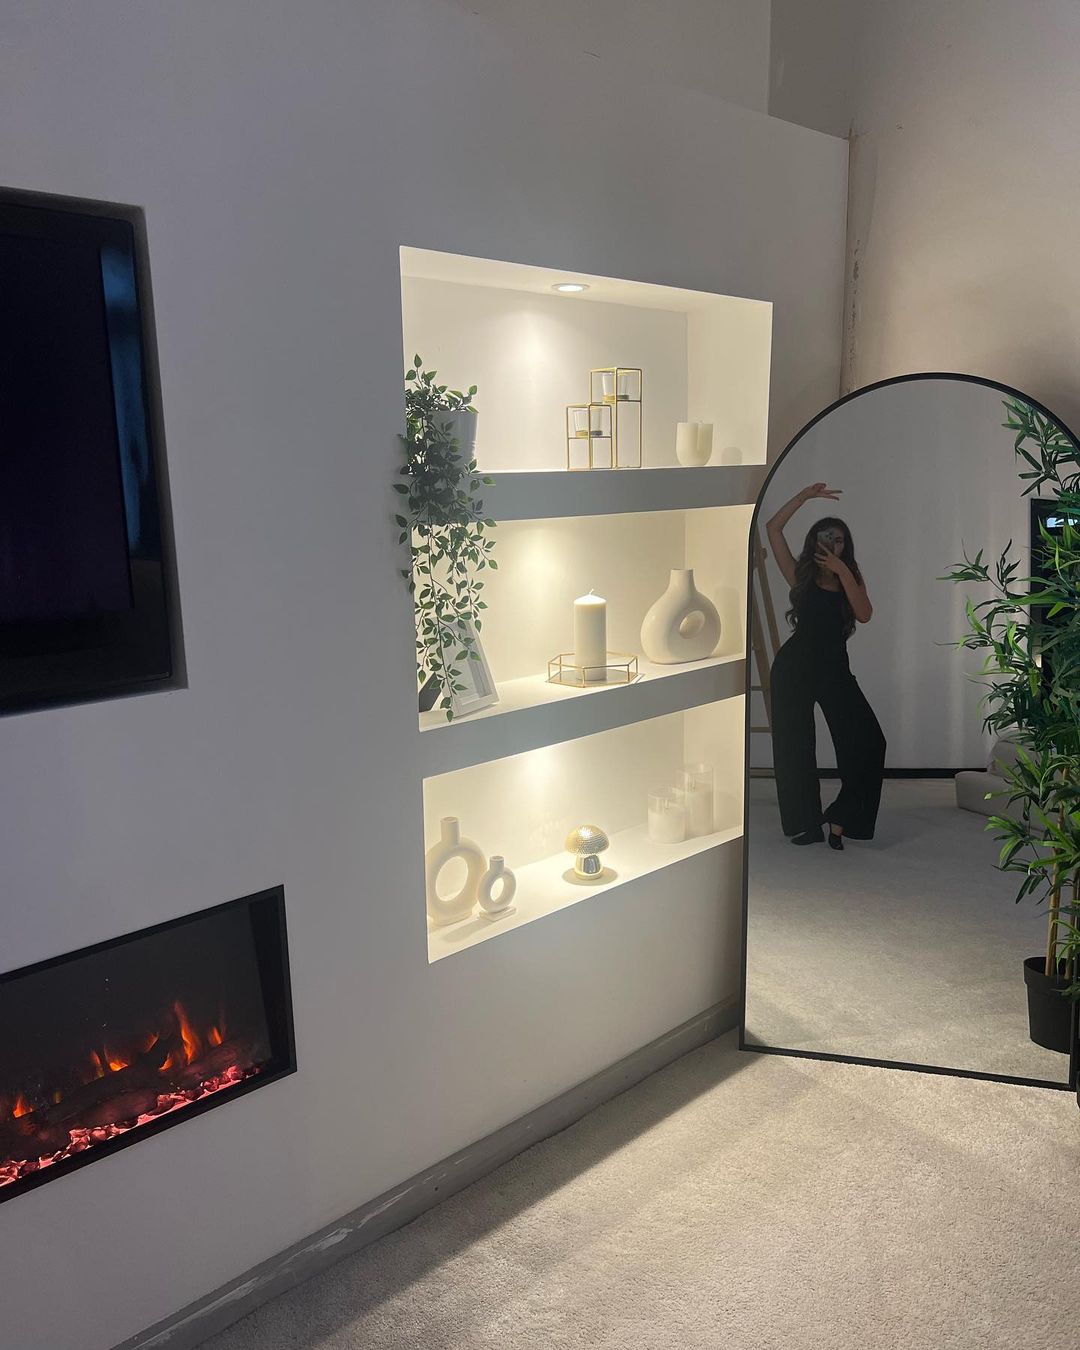 Geordie Shore star Chloe Ferry shows off incredible new lounge at £1m mansion with fireplace and flat screen TV